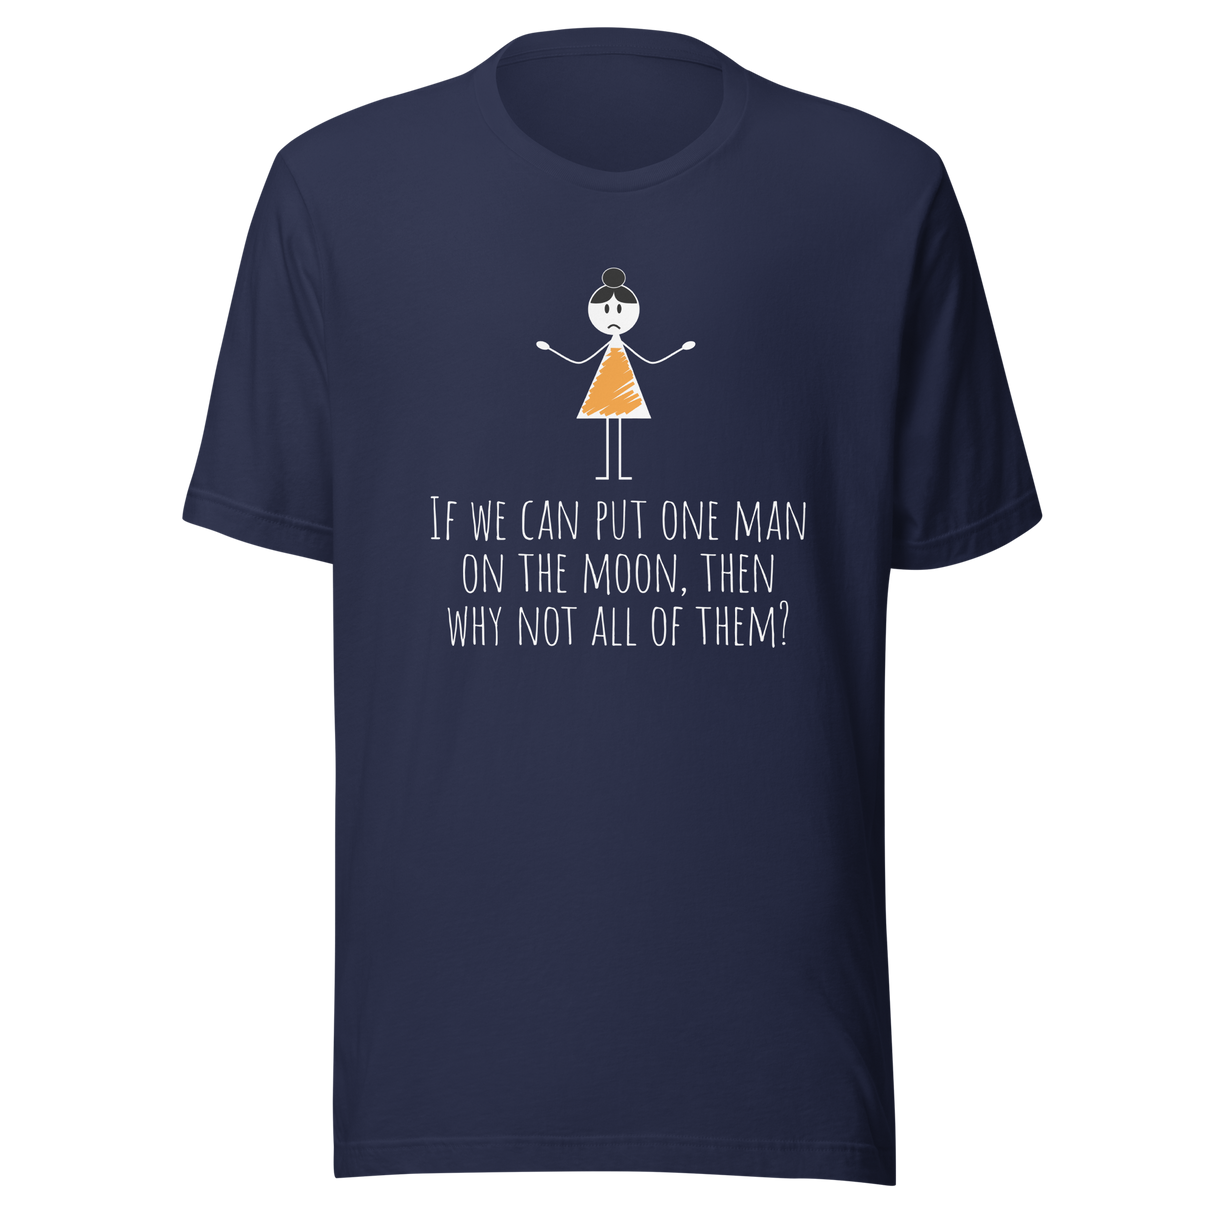 if-we-can-put-one-man-on-the-moon-then-why-not-all-of-them-moon-tee-vibes-t-shirt-life-tee-t-shirt-tee#color_navy